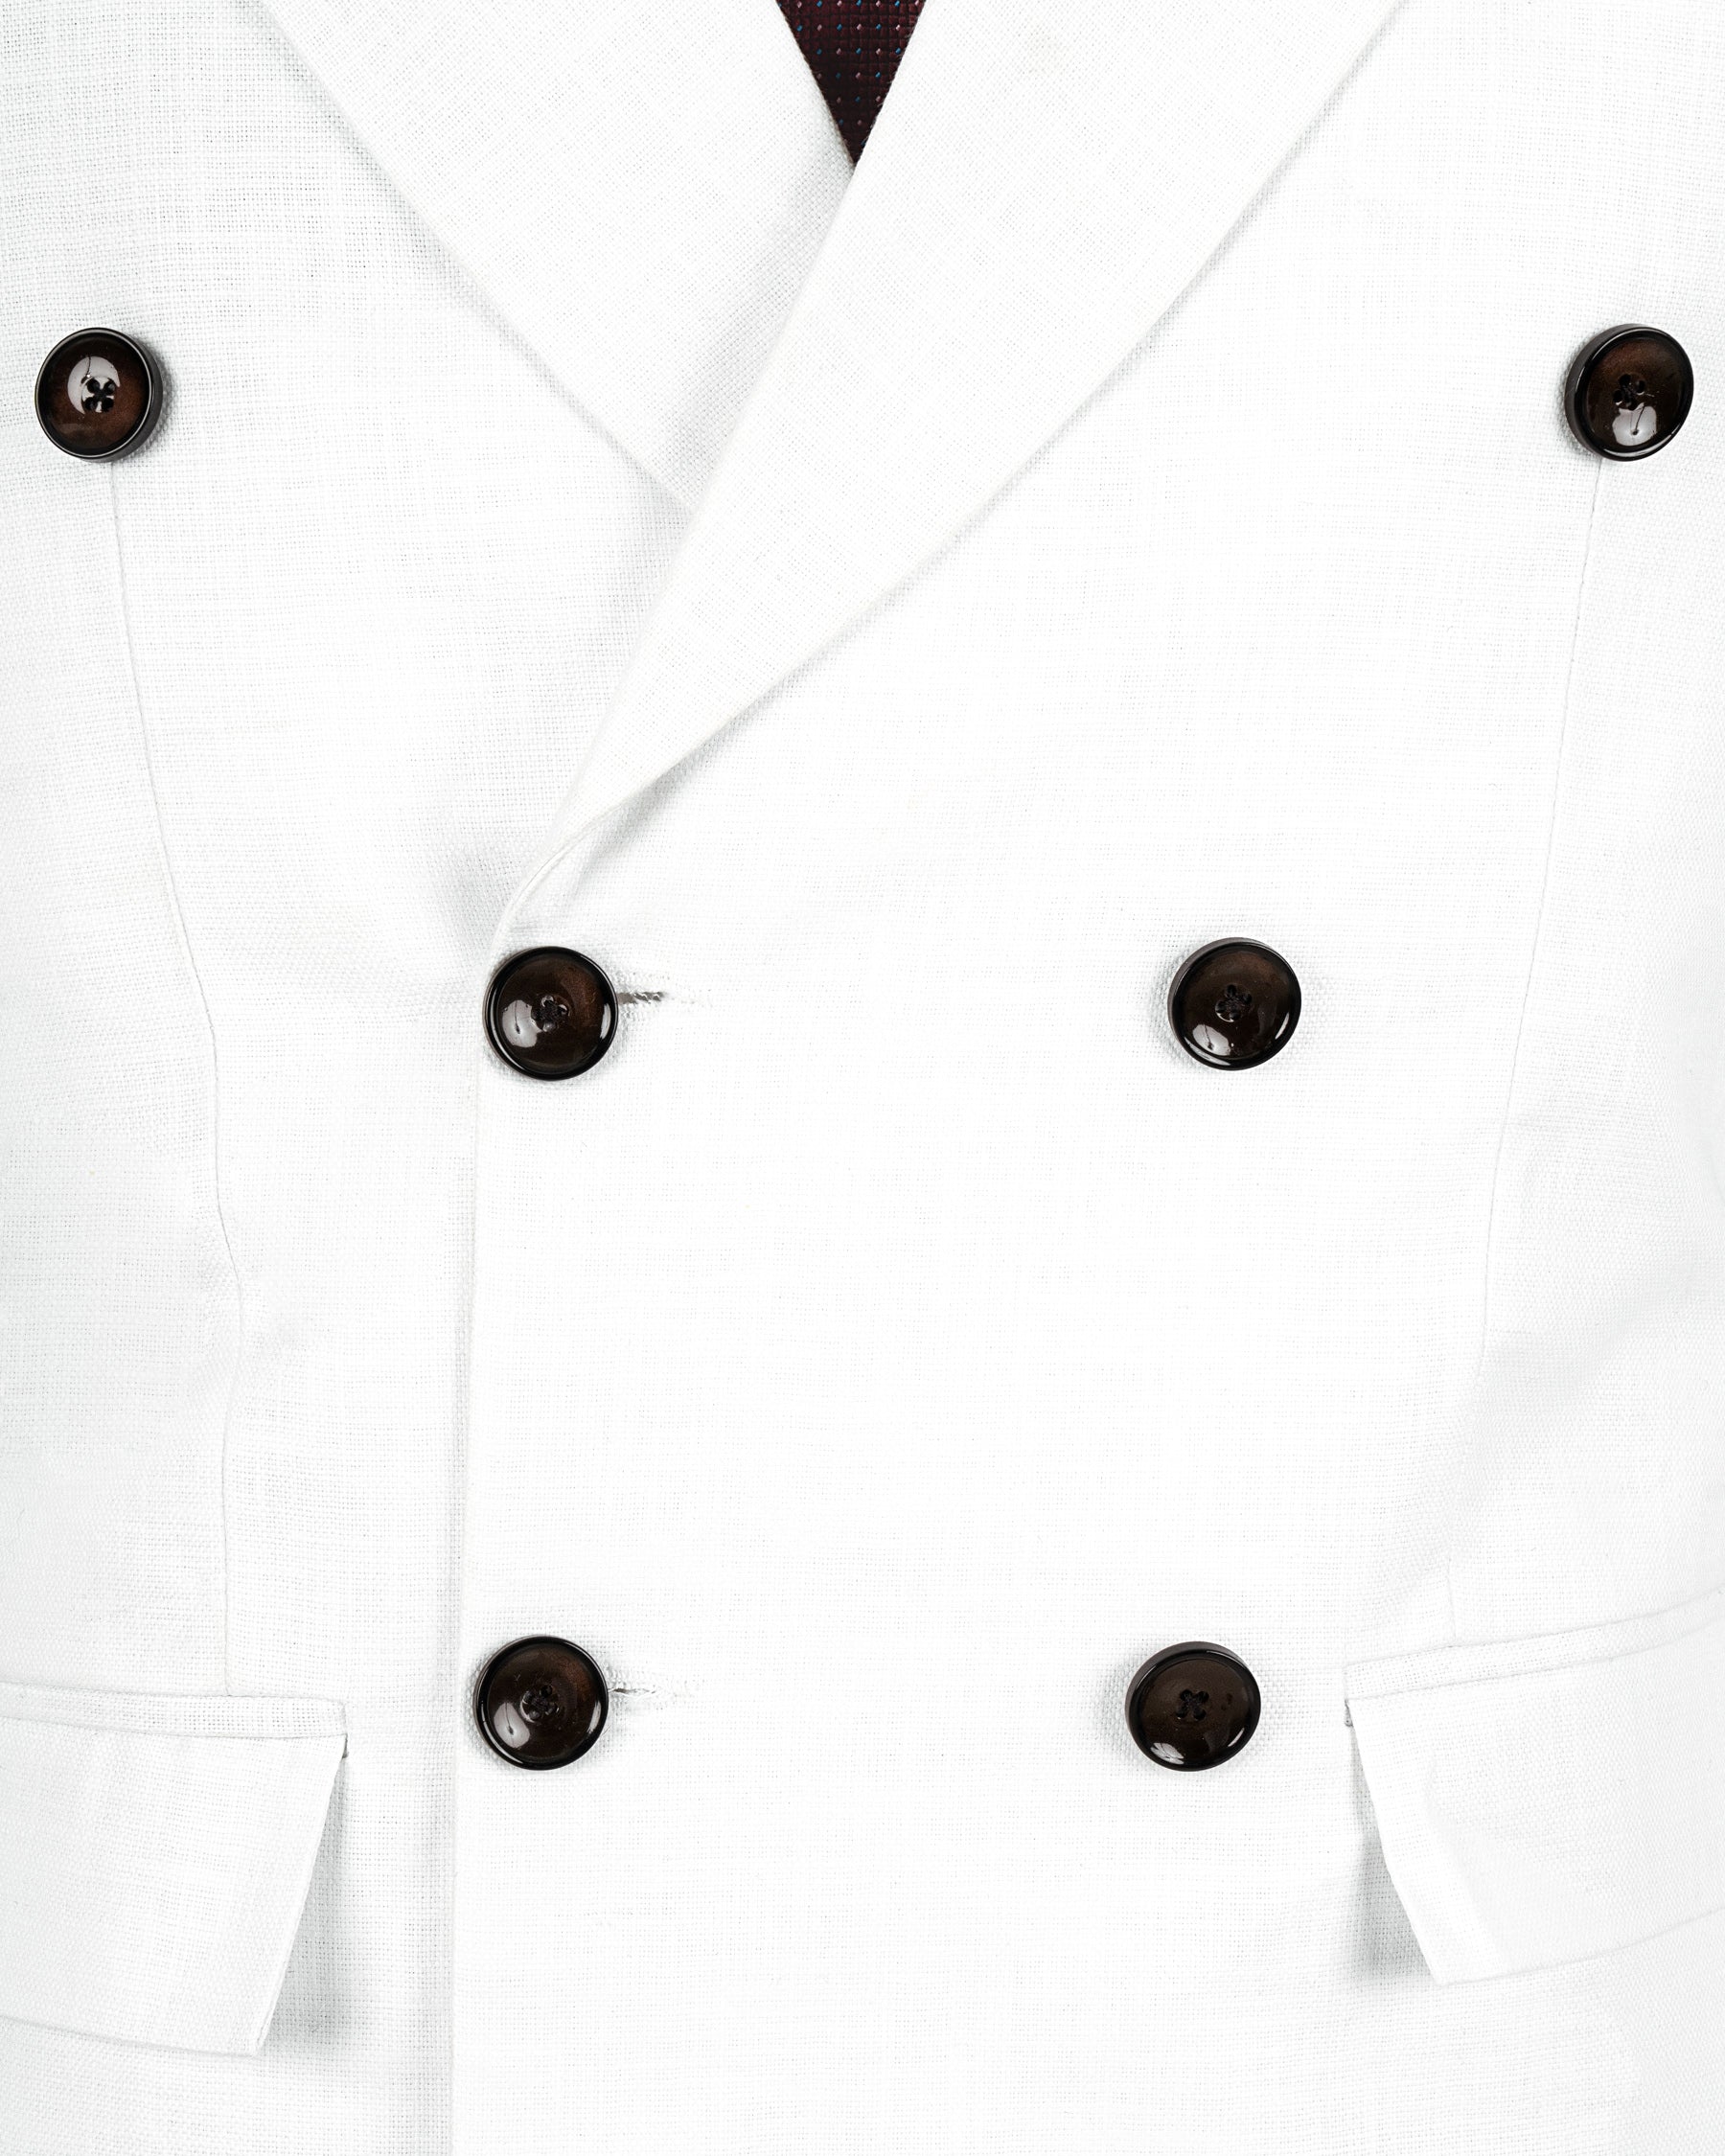 BRIGHT WHITE LUXURIOUS LINEN DOUBLE BREASTED PERFORMANCE BLAZER BL1239-DB-40, BL1239-DB-46, BL1239-DB-54, BL1239-DB-56, BL1239-DB-60, BL1239-DB-42, BL1239-DB-36, BL1239-DB-38, BL1239-DB-44, BL1239-DB-50, BL1239-DB-58, BL1239-DB-52, BL1239-DB-48